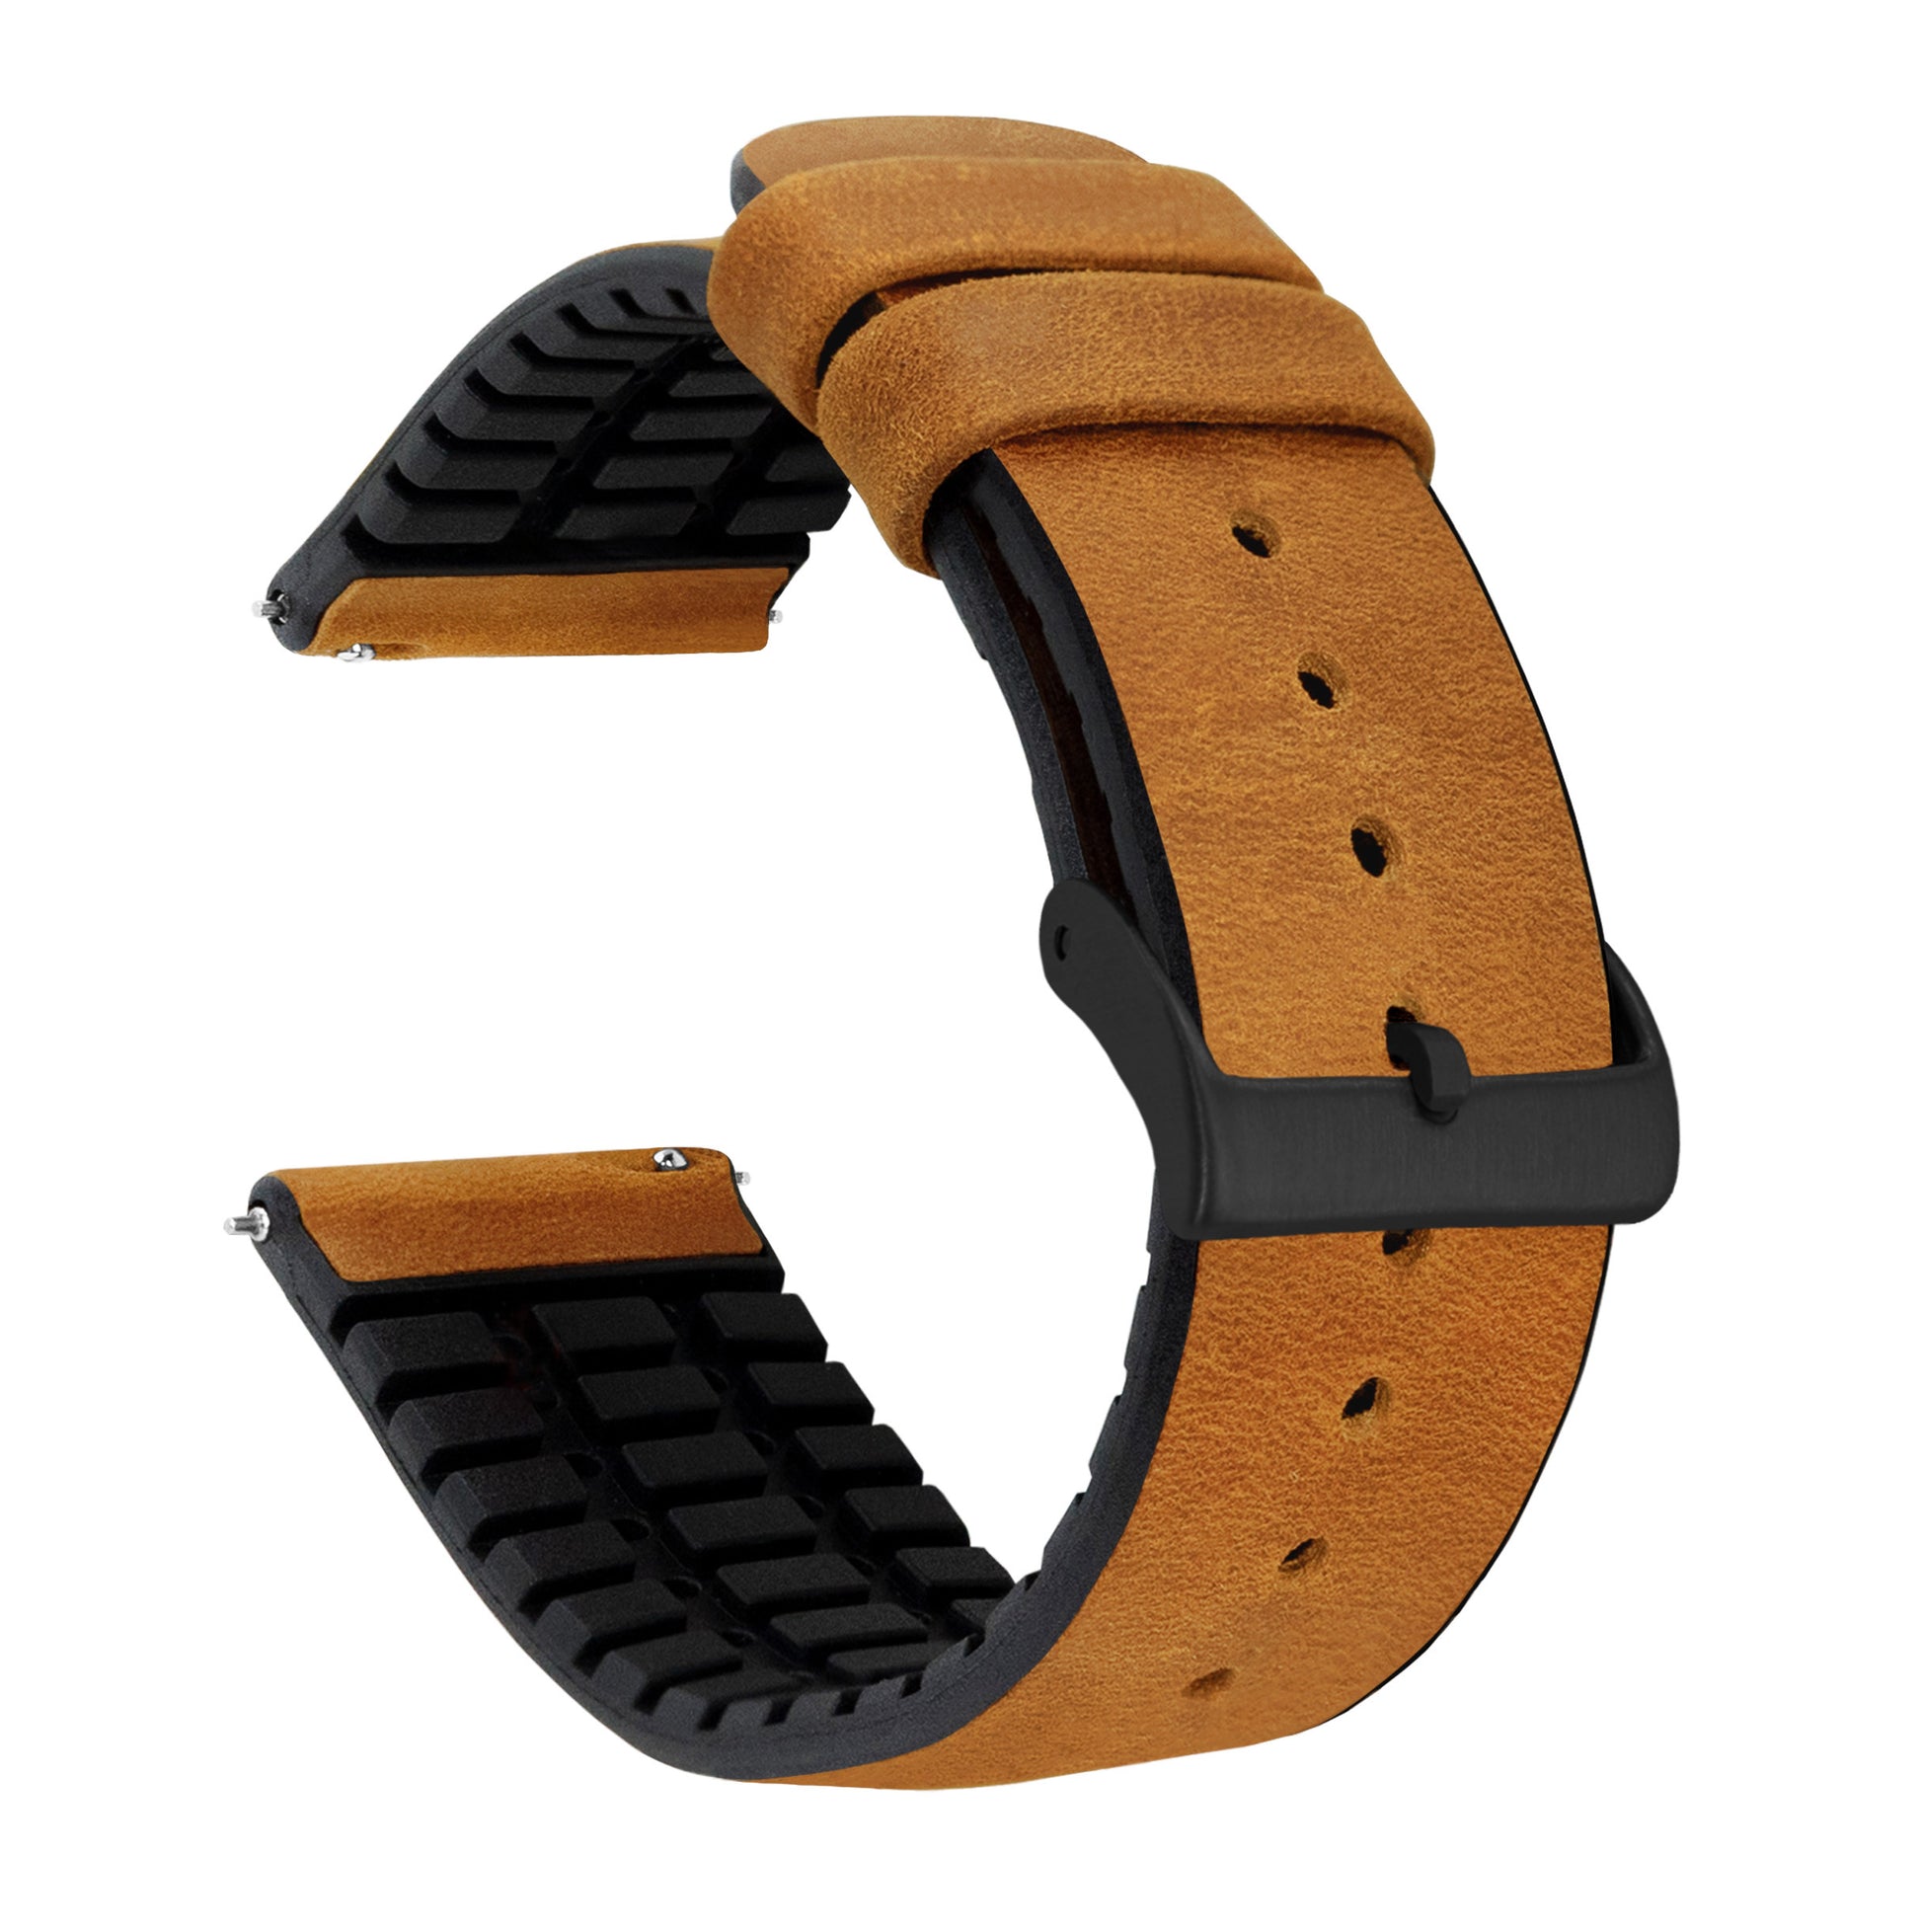 Samsung Galaxy Watch Active 2 | Leather and Rubber Hybrid | Cedar Brown - Barton Watch Bands